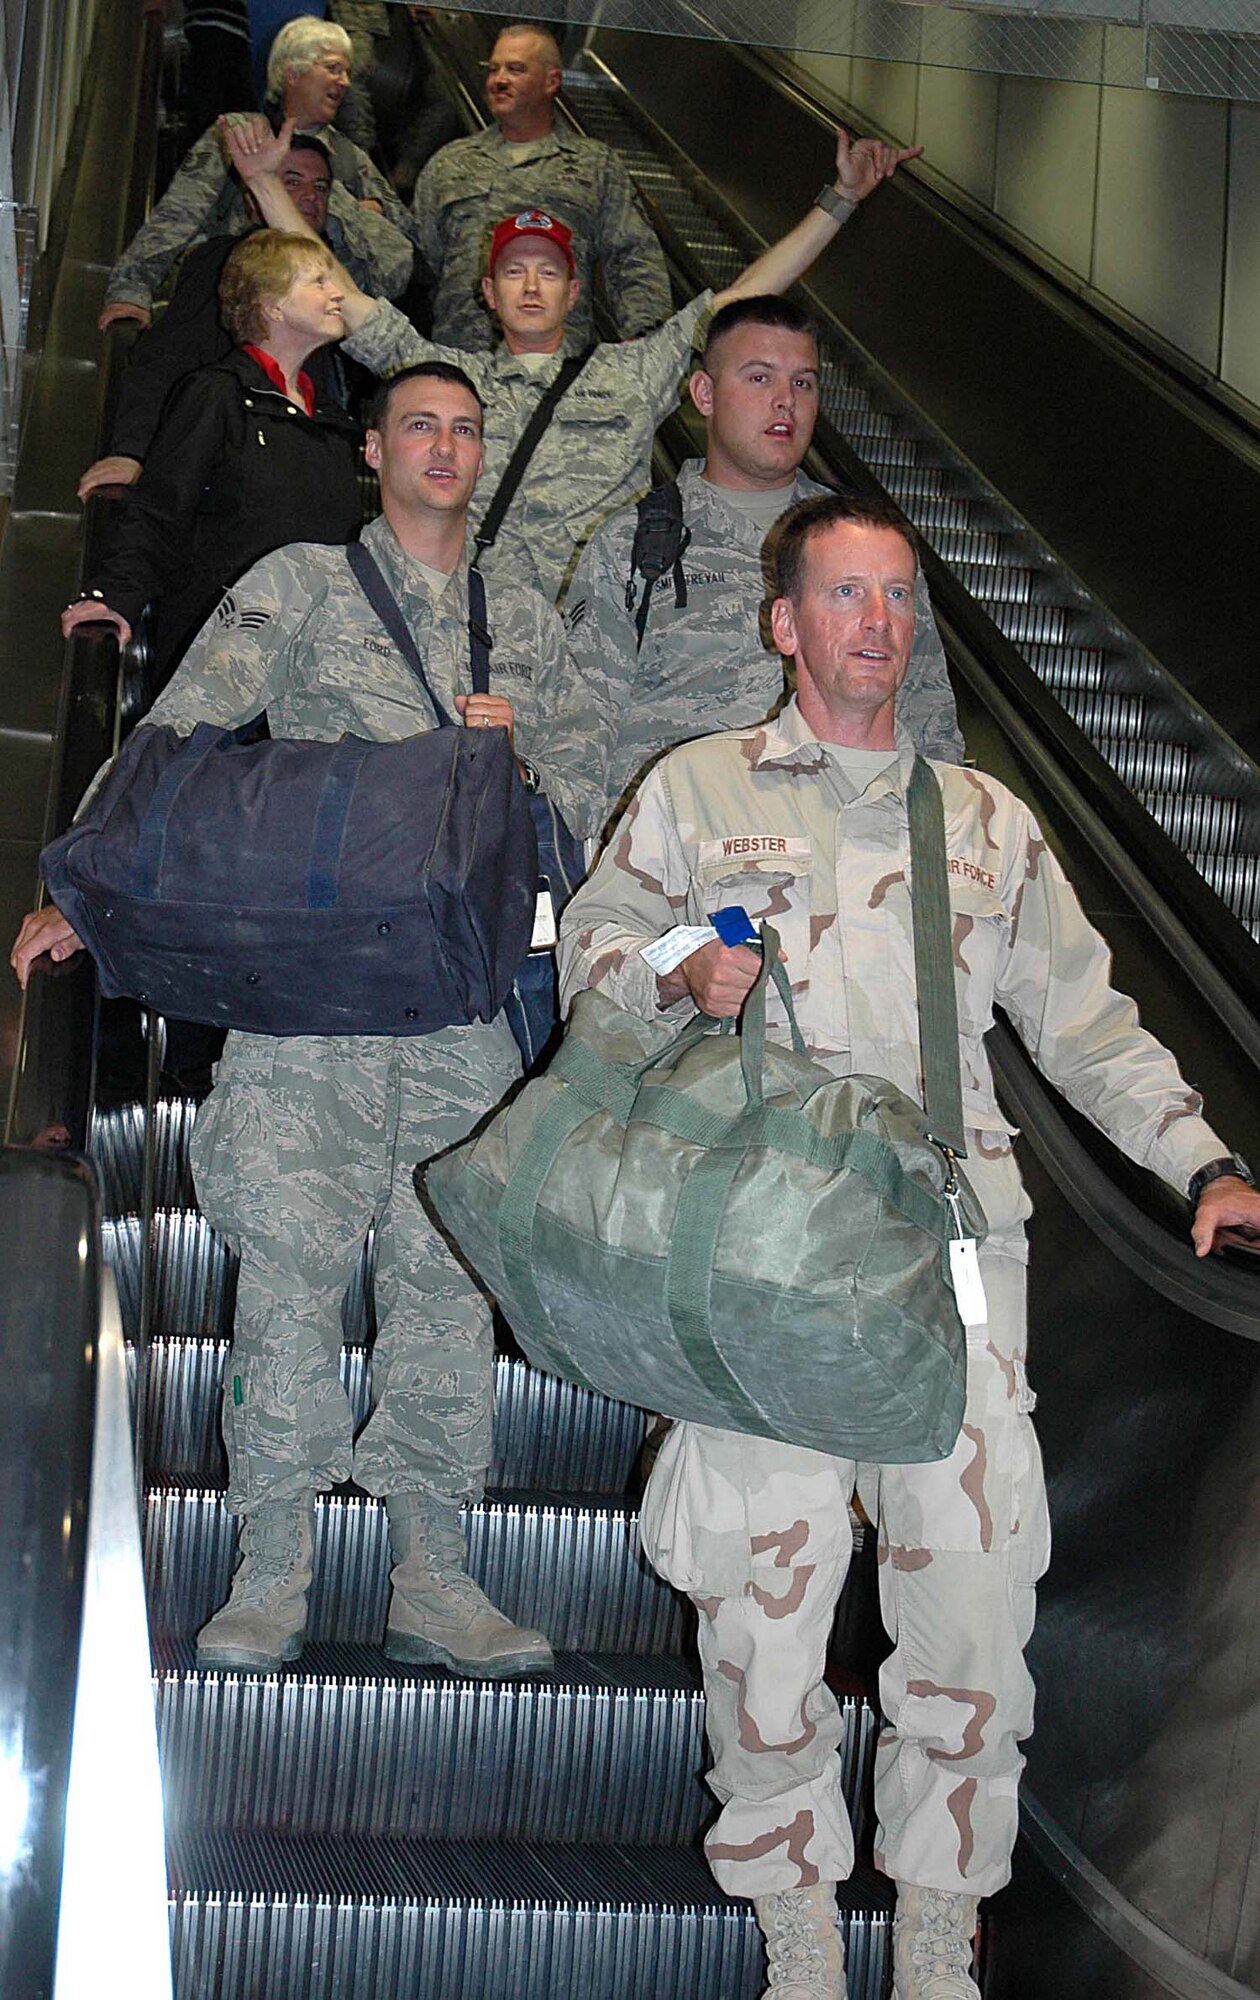 Reservists from the 446th Civil Engineer Squadron at McChord Air Force Base, Wash., descend an escalator at SeaTac International Airport April 10 after receiving a hearty welcome home from Iraq. The Airmen, who were deployed for six months, assisted with construction of buildings for the Army, Marines and Air Force forces in Iraq.  While deployed the Airmen labored under extreme weather conditions ranging from 90 degree heatwaves to frosty 20 degree weather and snow. (U.S. Air Force photo/Airman First Class Patrick Cabellon)